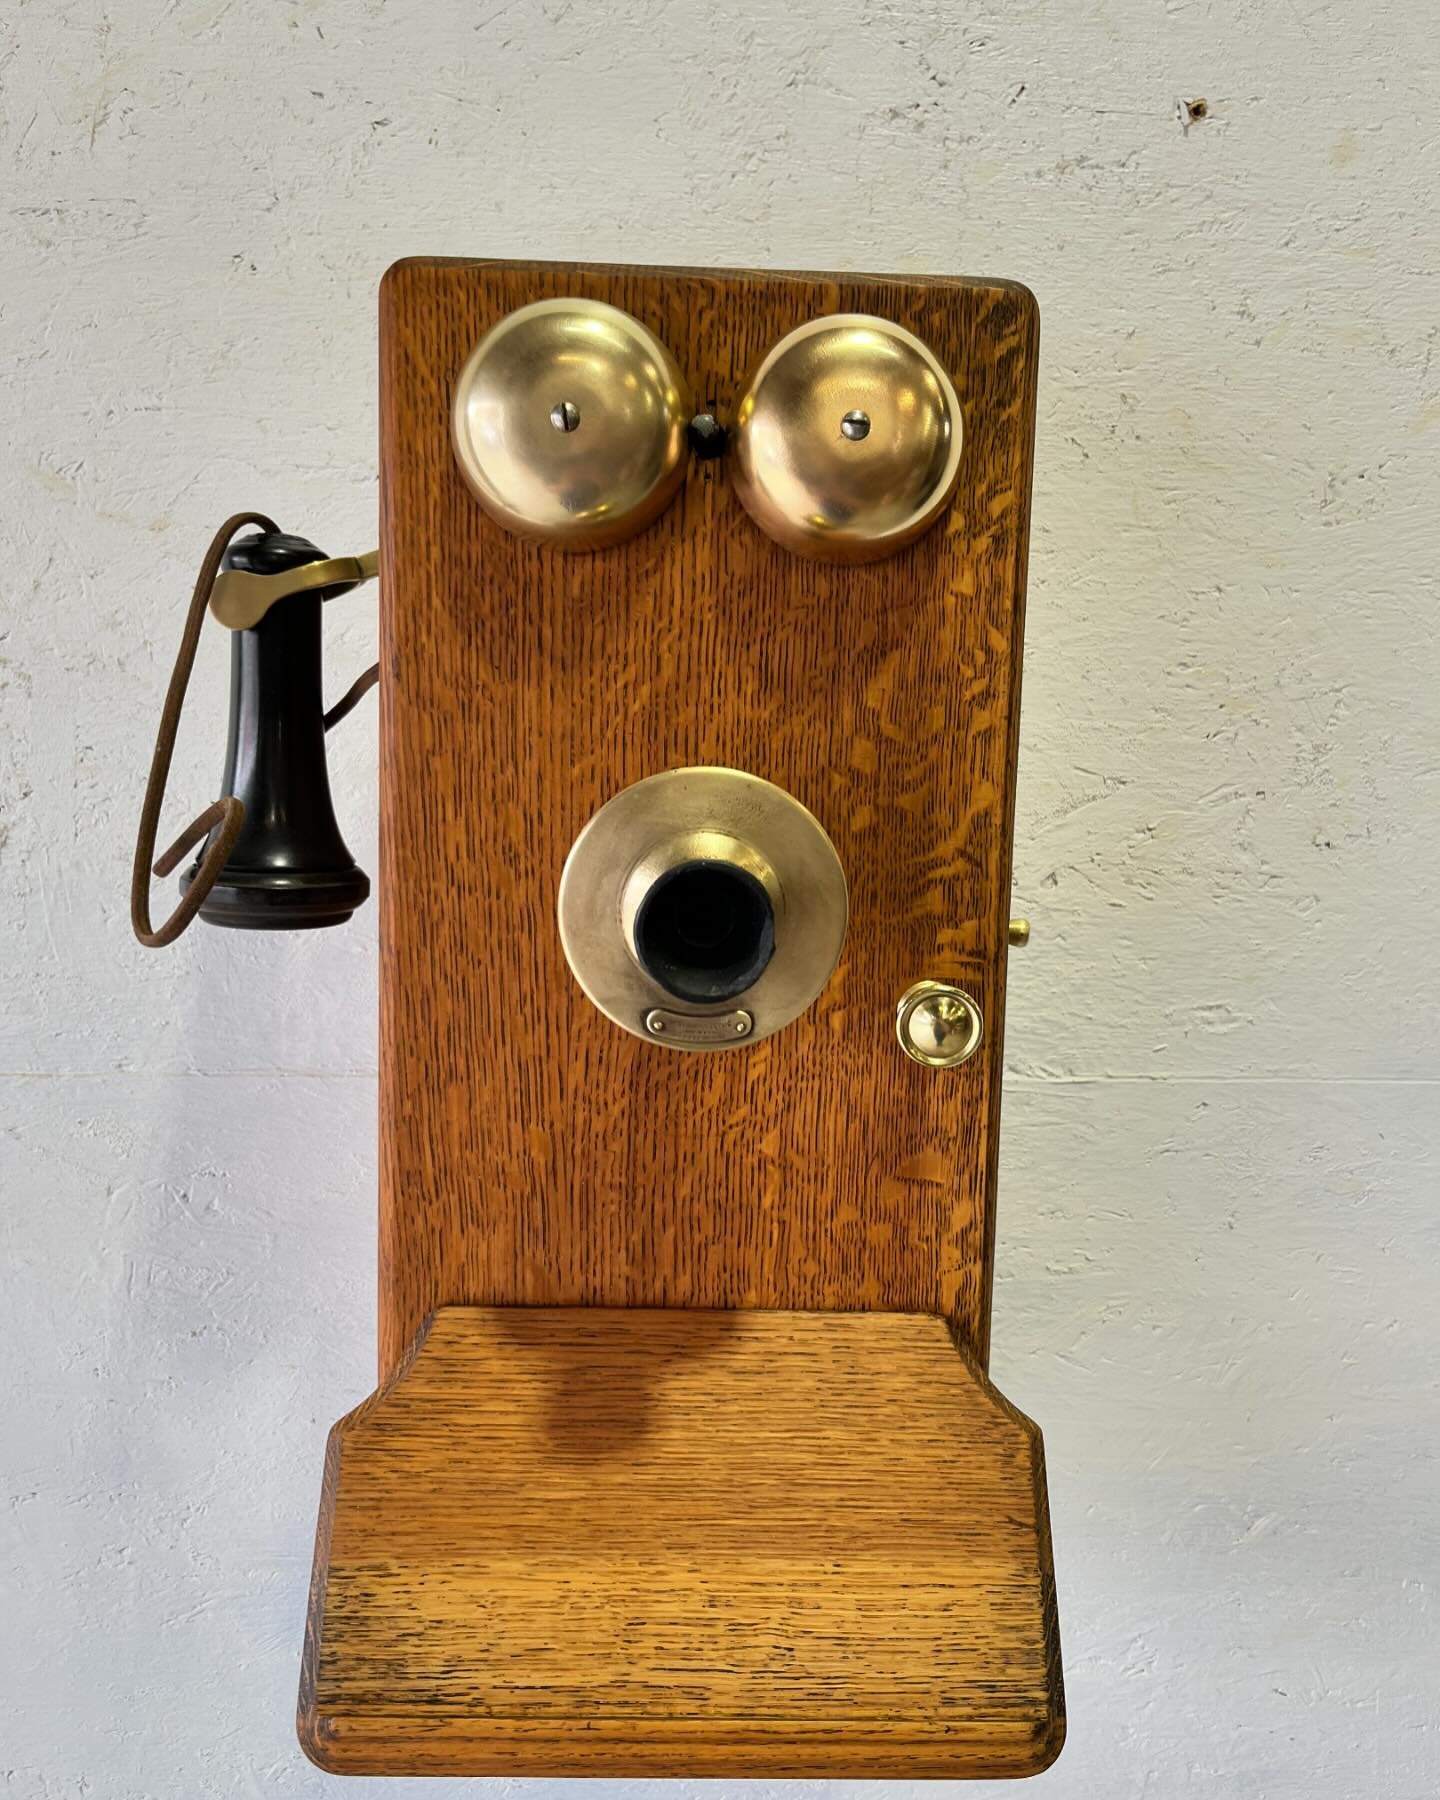 We cleaned up this beautiful vintage telephone by cleaning off years of grime and removing the old finish. We left this in its natural wood color and sealed it with @rubiomonocoat The hardware was cleaned with @barkeepersfriend 

Got a dirty, broken,